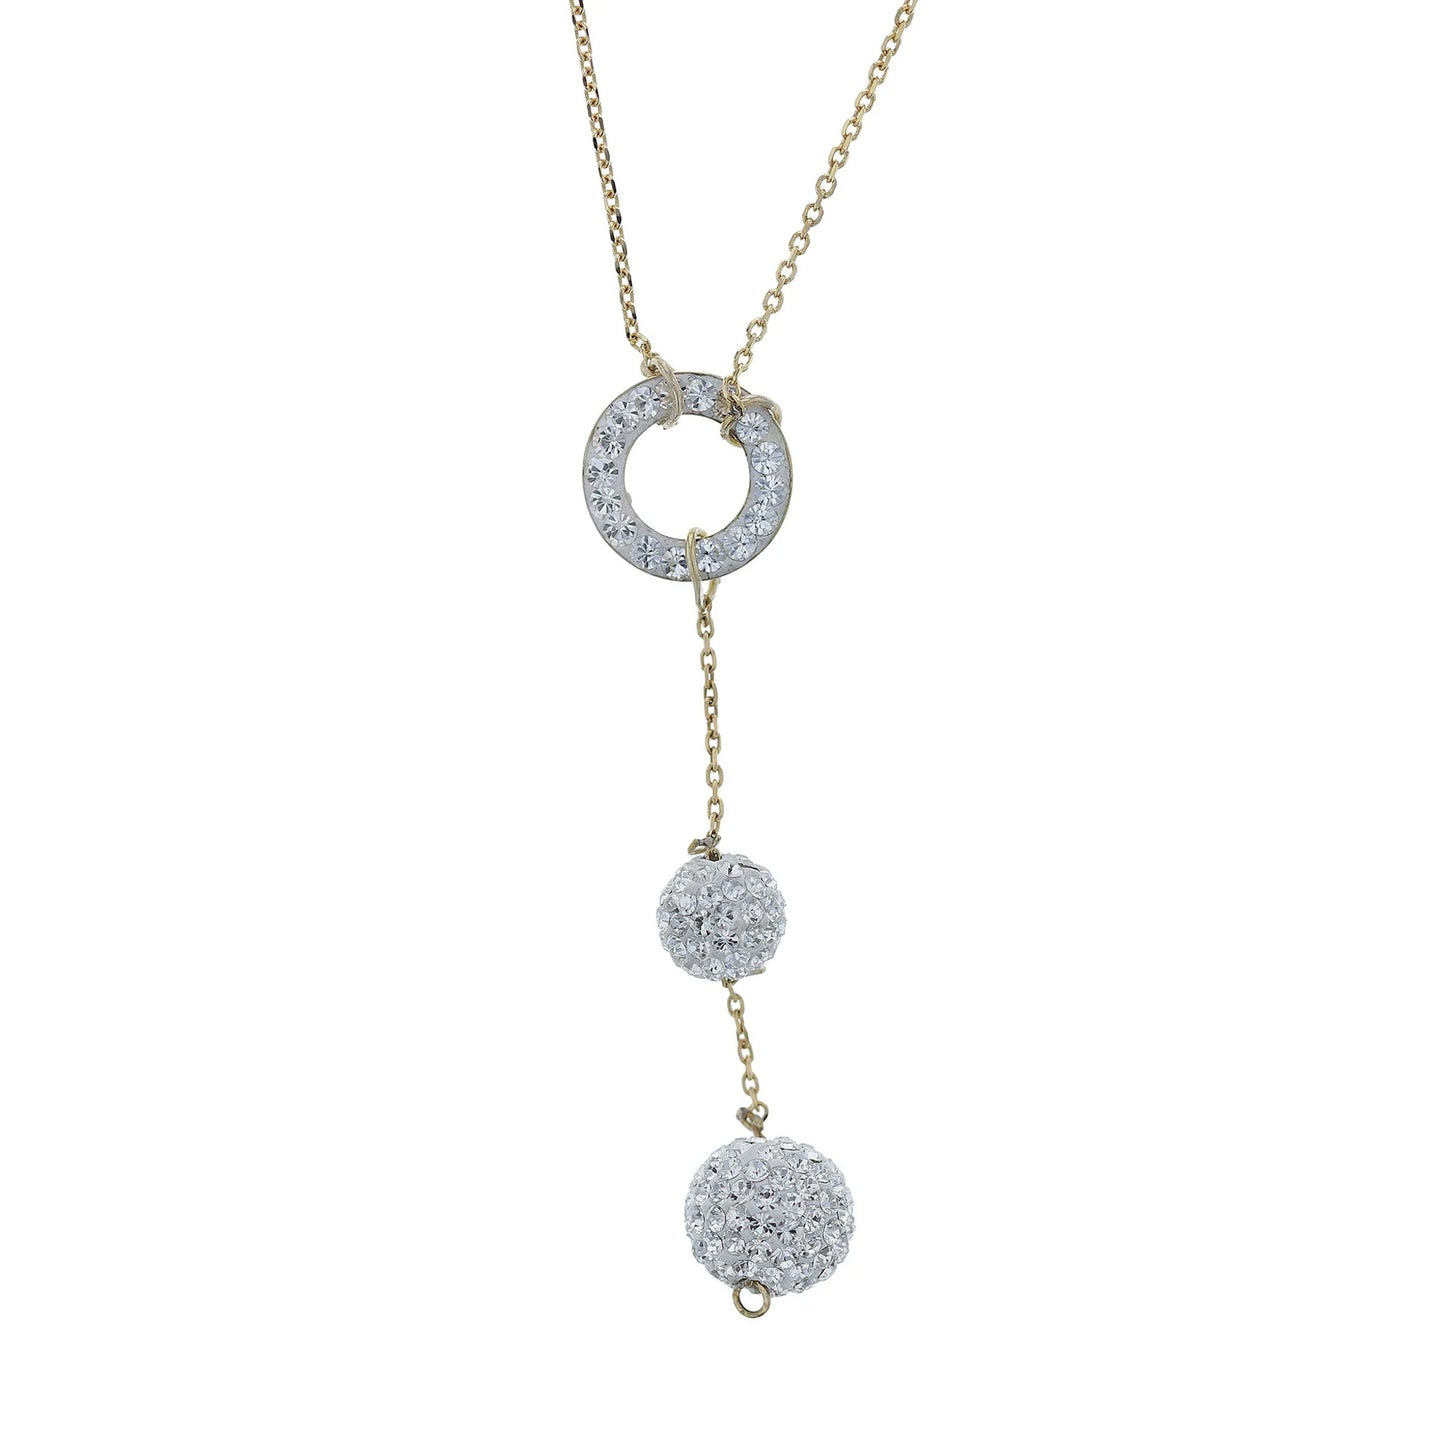 18K Gold Plated Sterling Silver Circle Drop Necklace with Crystal balls White Crystals